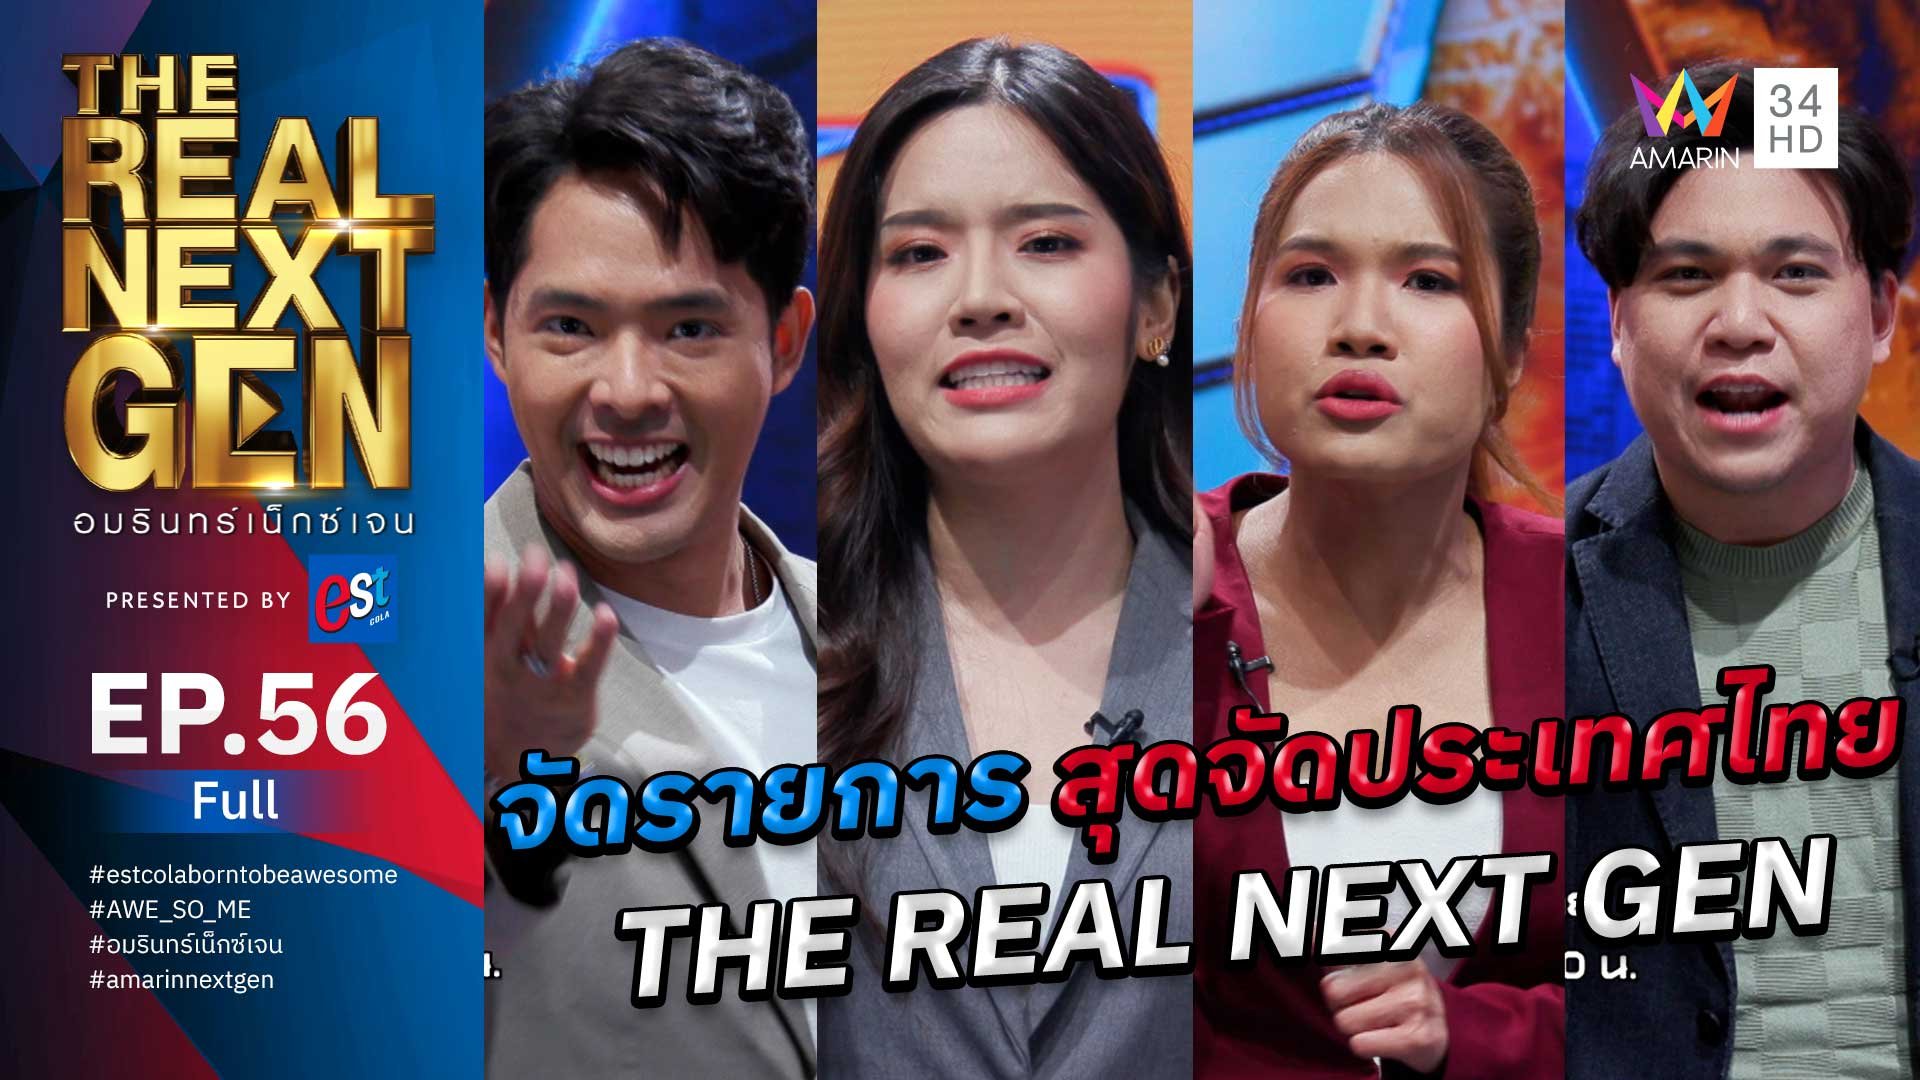 The Real Next Gen อมรินทร์เน็กซ์เจน | EP.56 THE REAL NEXT GEN อมรินทร์เน็กซ์เจน Presented By est cola  | 4 ธ.ค. 66 | AMARIN TVHD34